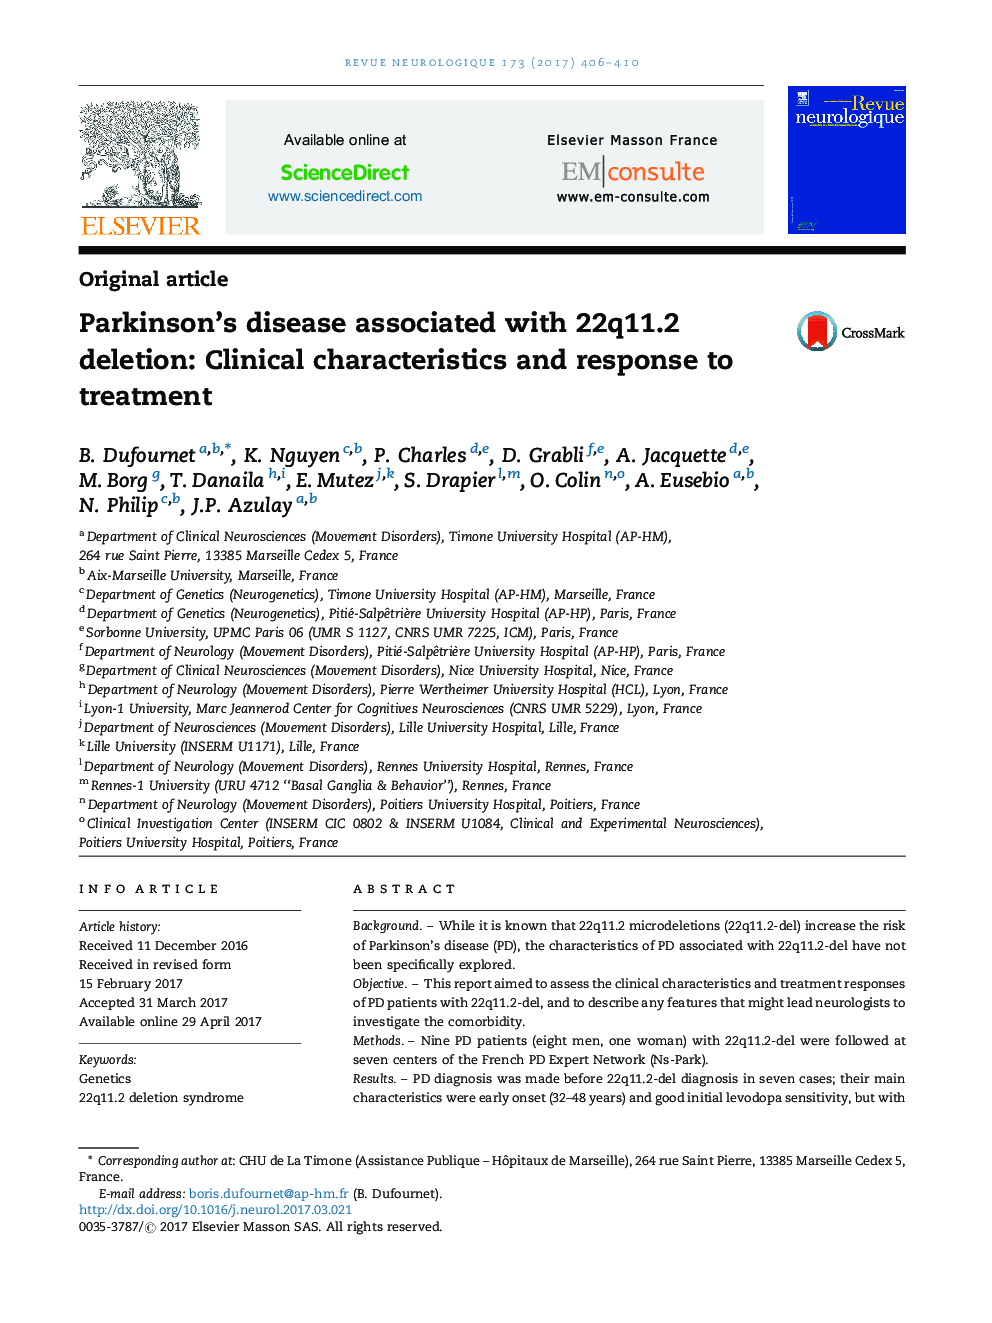 Original articleParkinson's disease associated with 22q11.2 deletion: Clinical characteristics and response to treatment